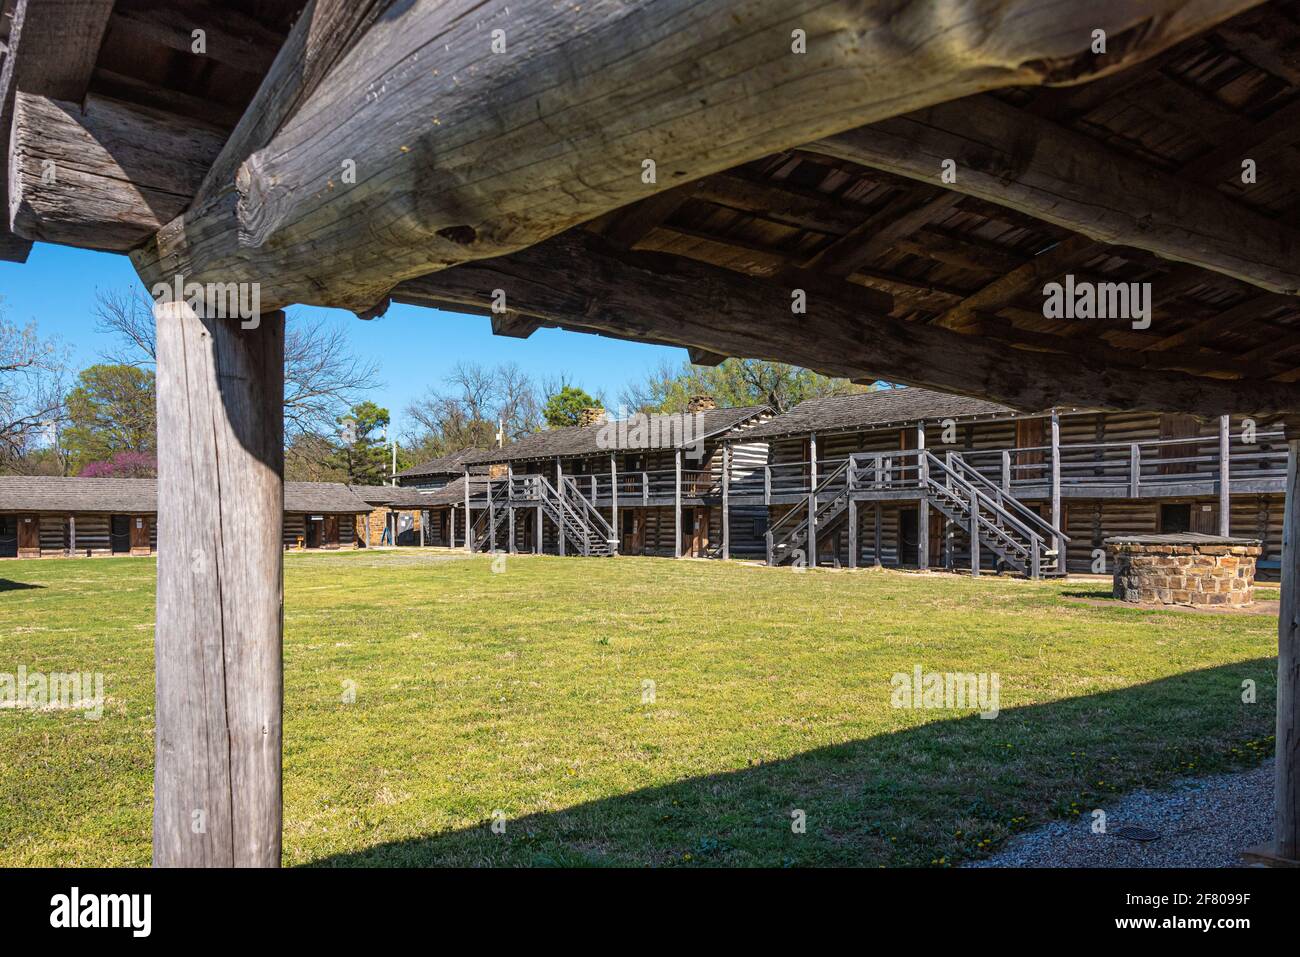 Inside the stockade at Fort Gibson, a historic military site in Oklahoma that guarded the American frontier in Indian Territory from 1824 until 1888. Stock Photo